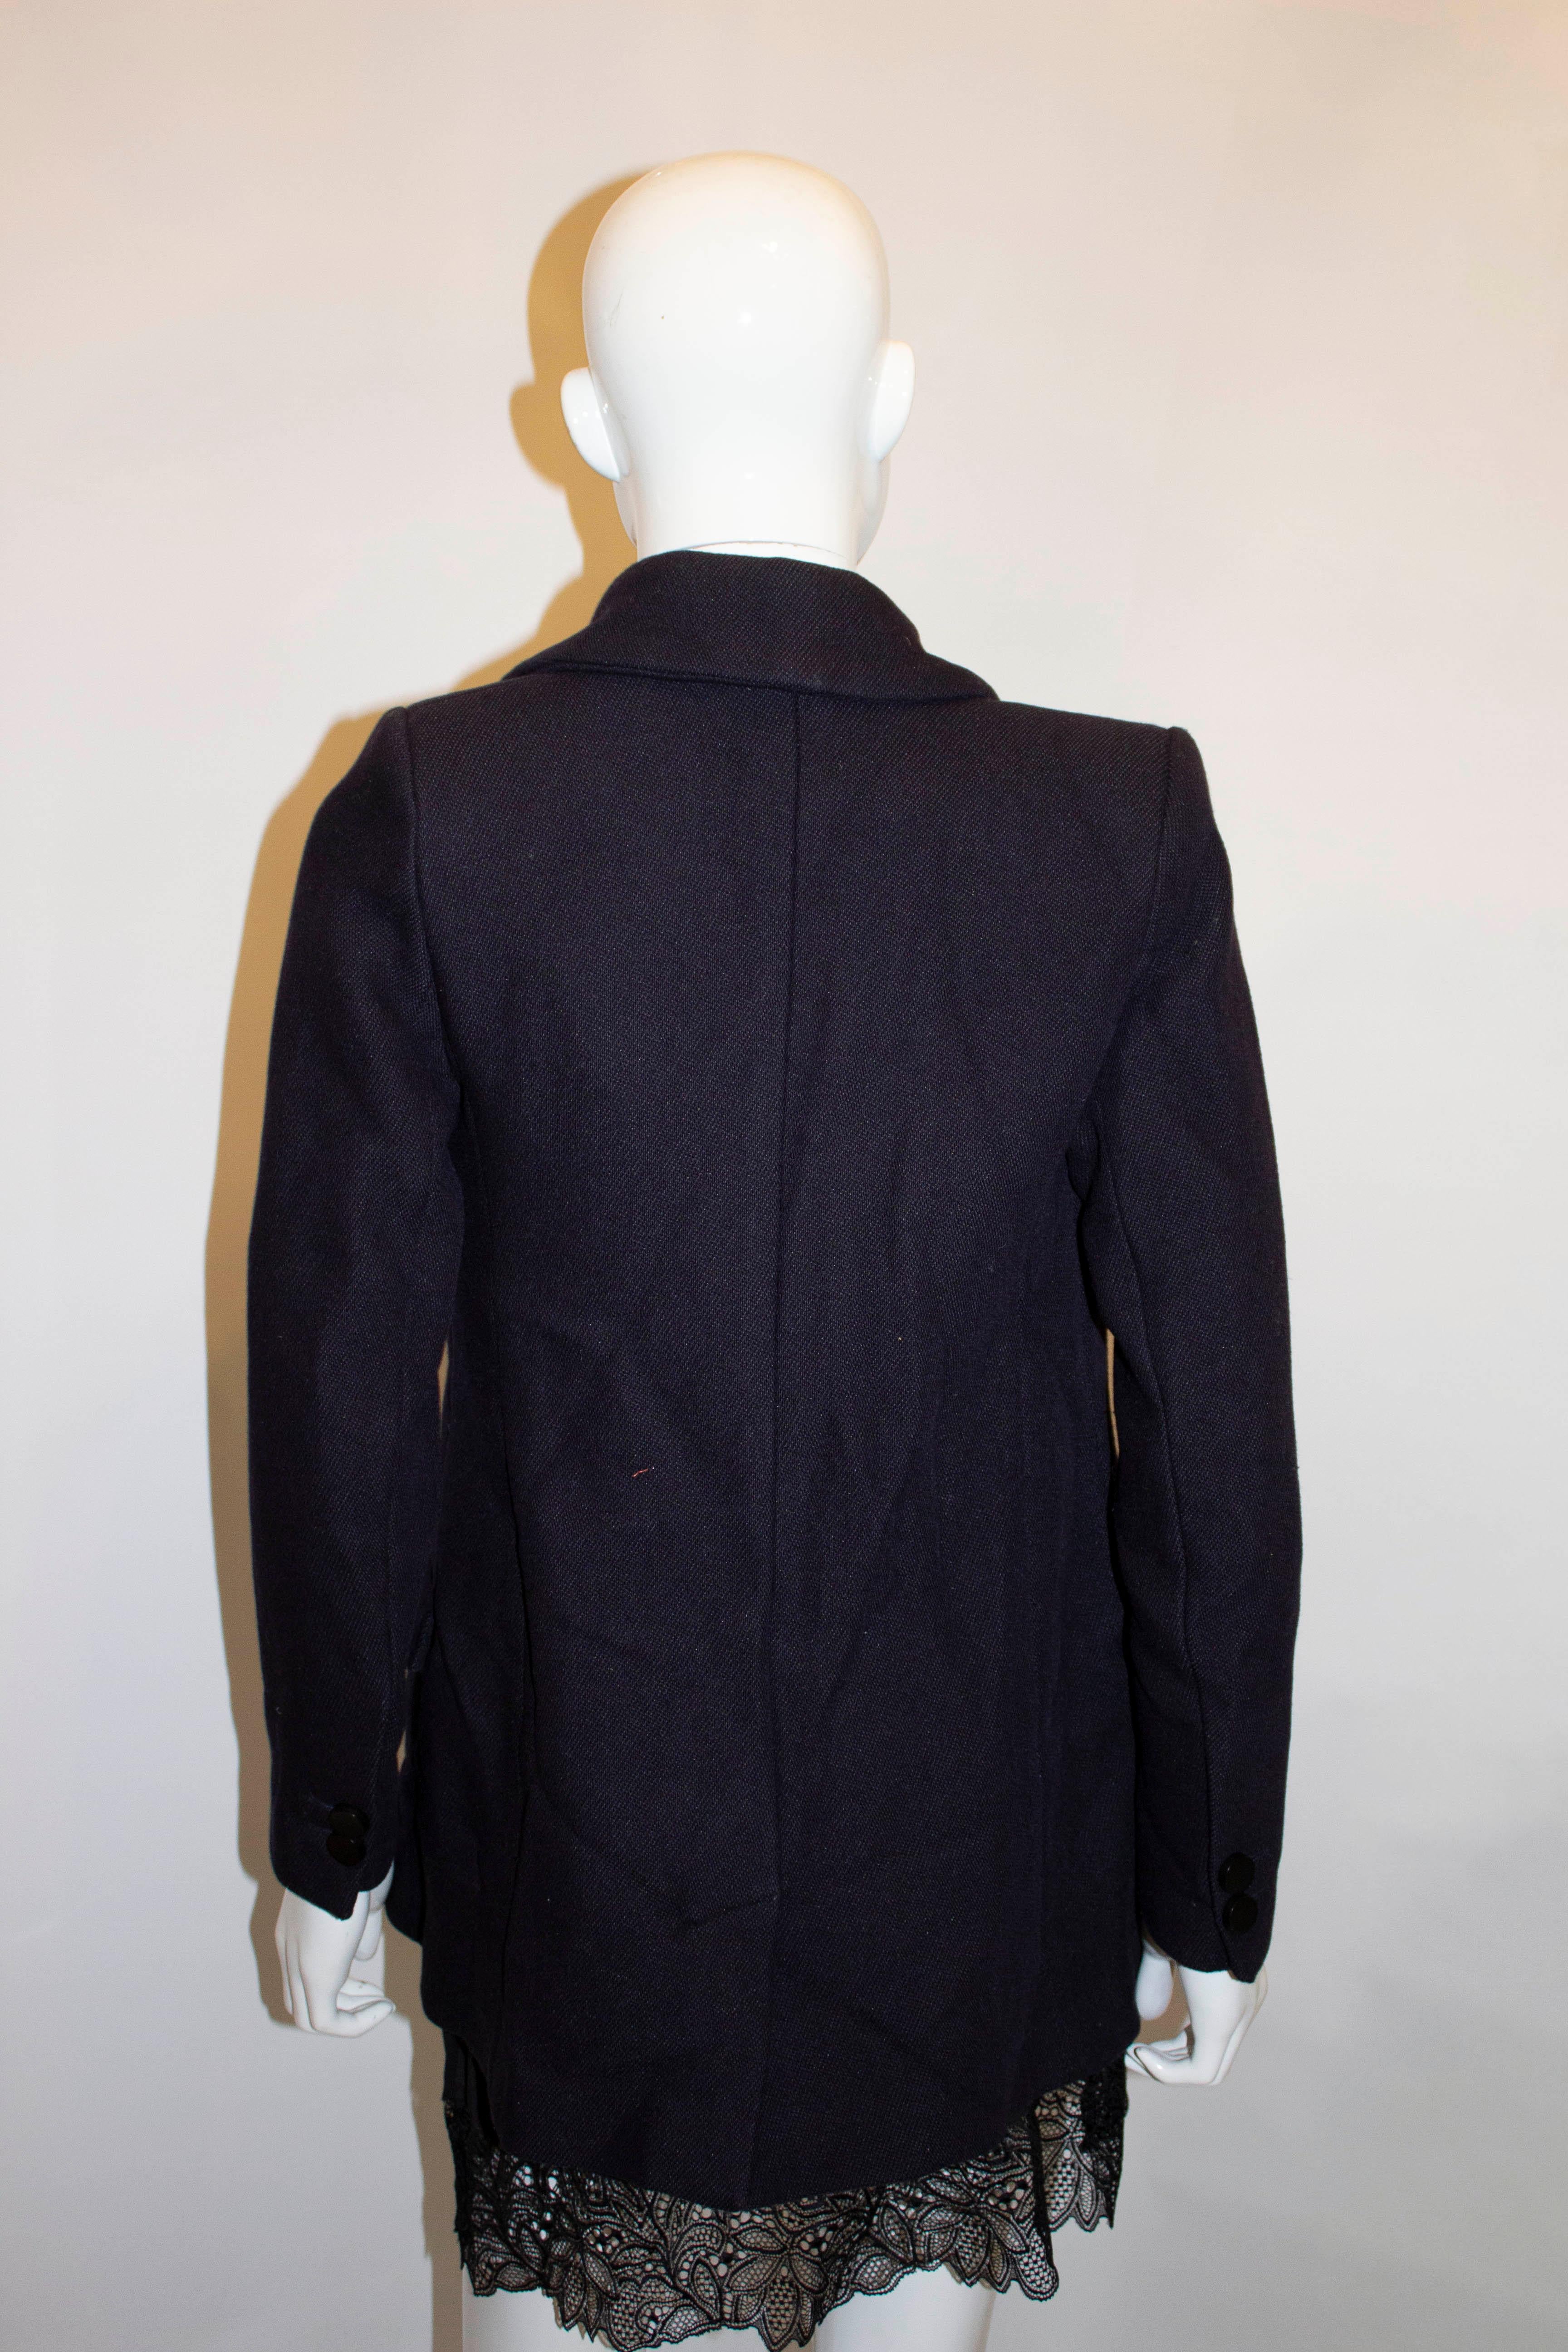 Isabel Marant   Black Wool Jacket In Good Condition For Sale In London, GB